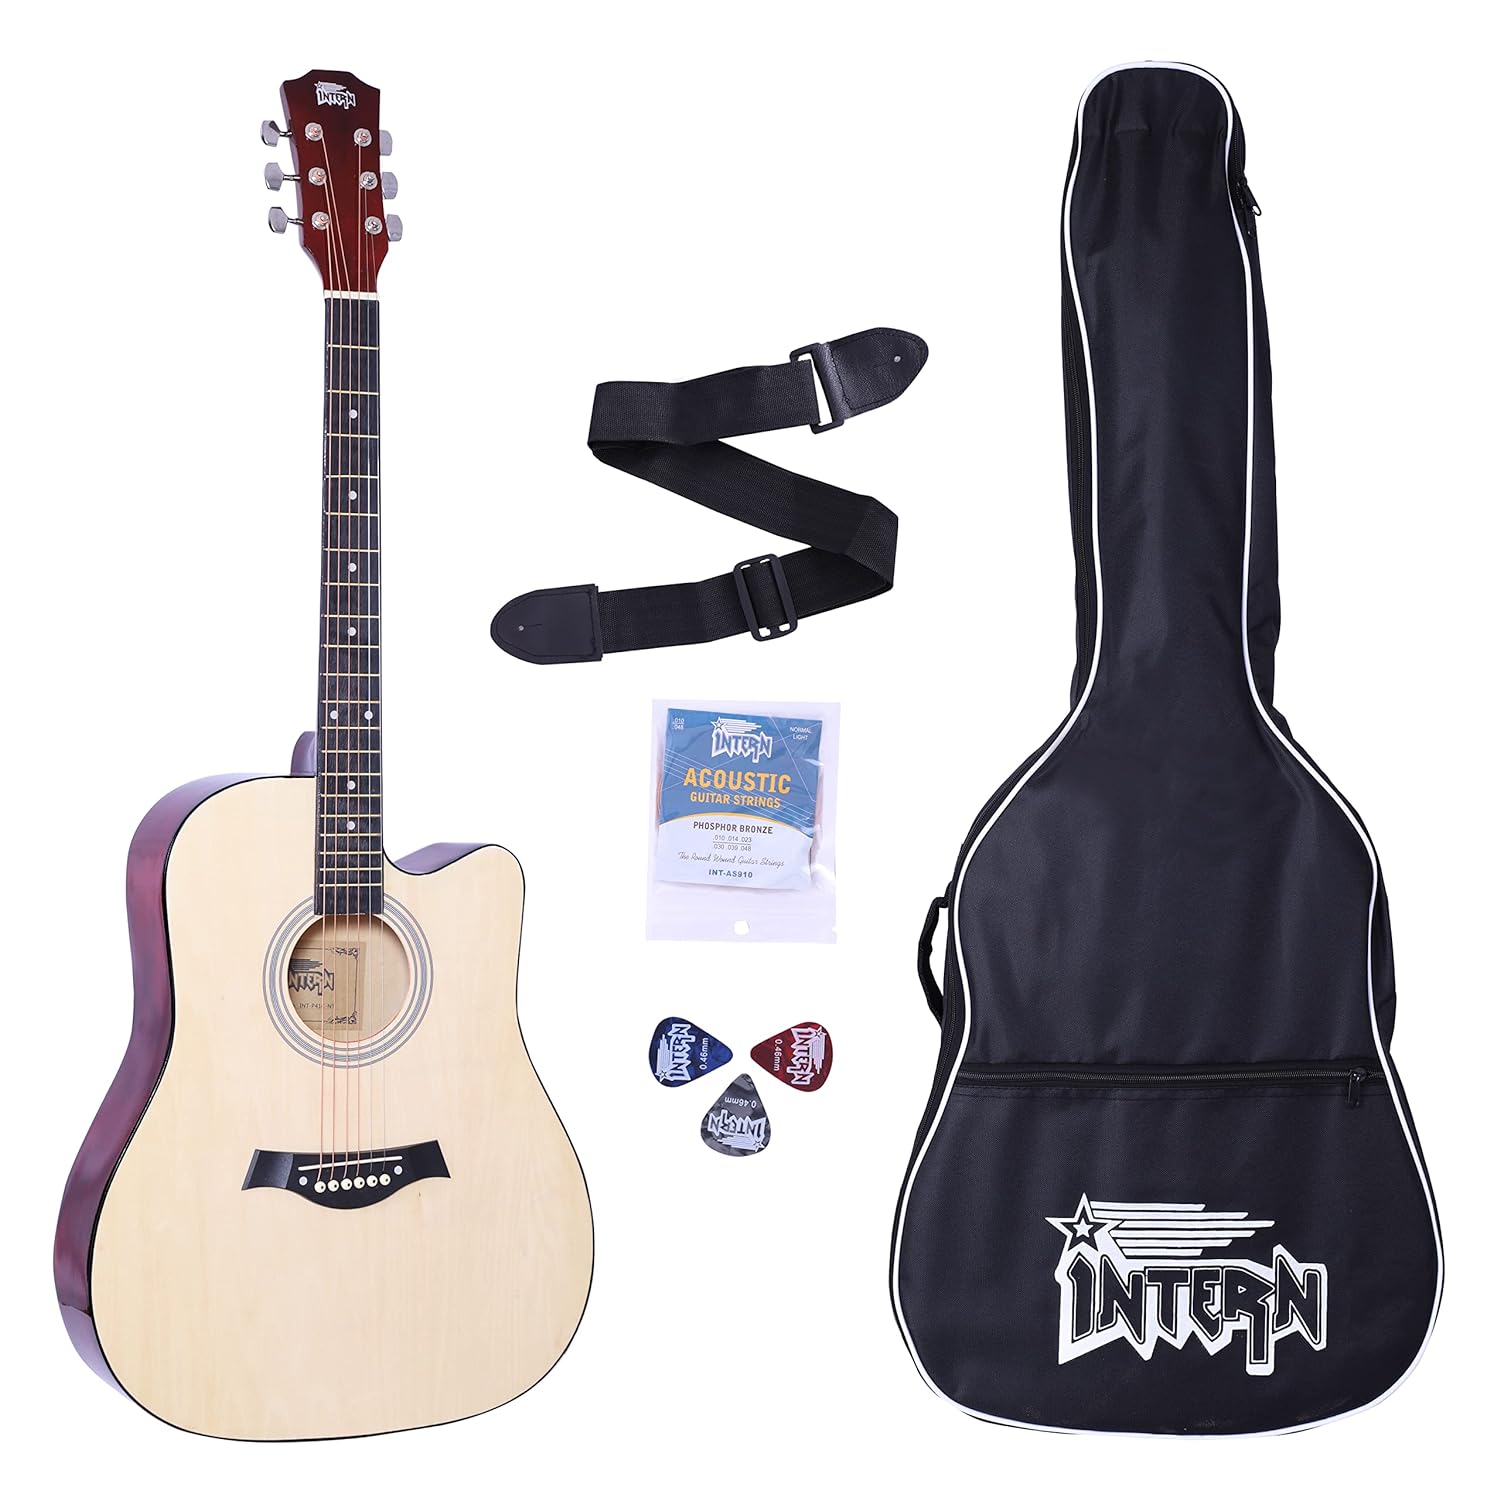 INTERN 41 inches Acoustic Guitar with truss rod. Includes carry bag, strings pack, strap & plectrums. Premium Wooden durable built, tonal stability & for all age-groups (Refreshing Natural).…